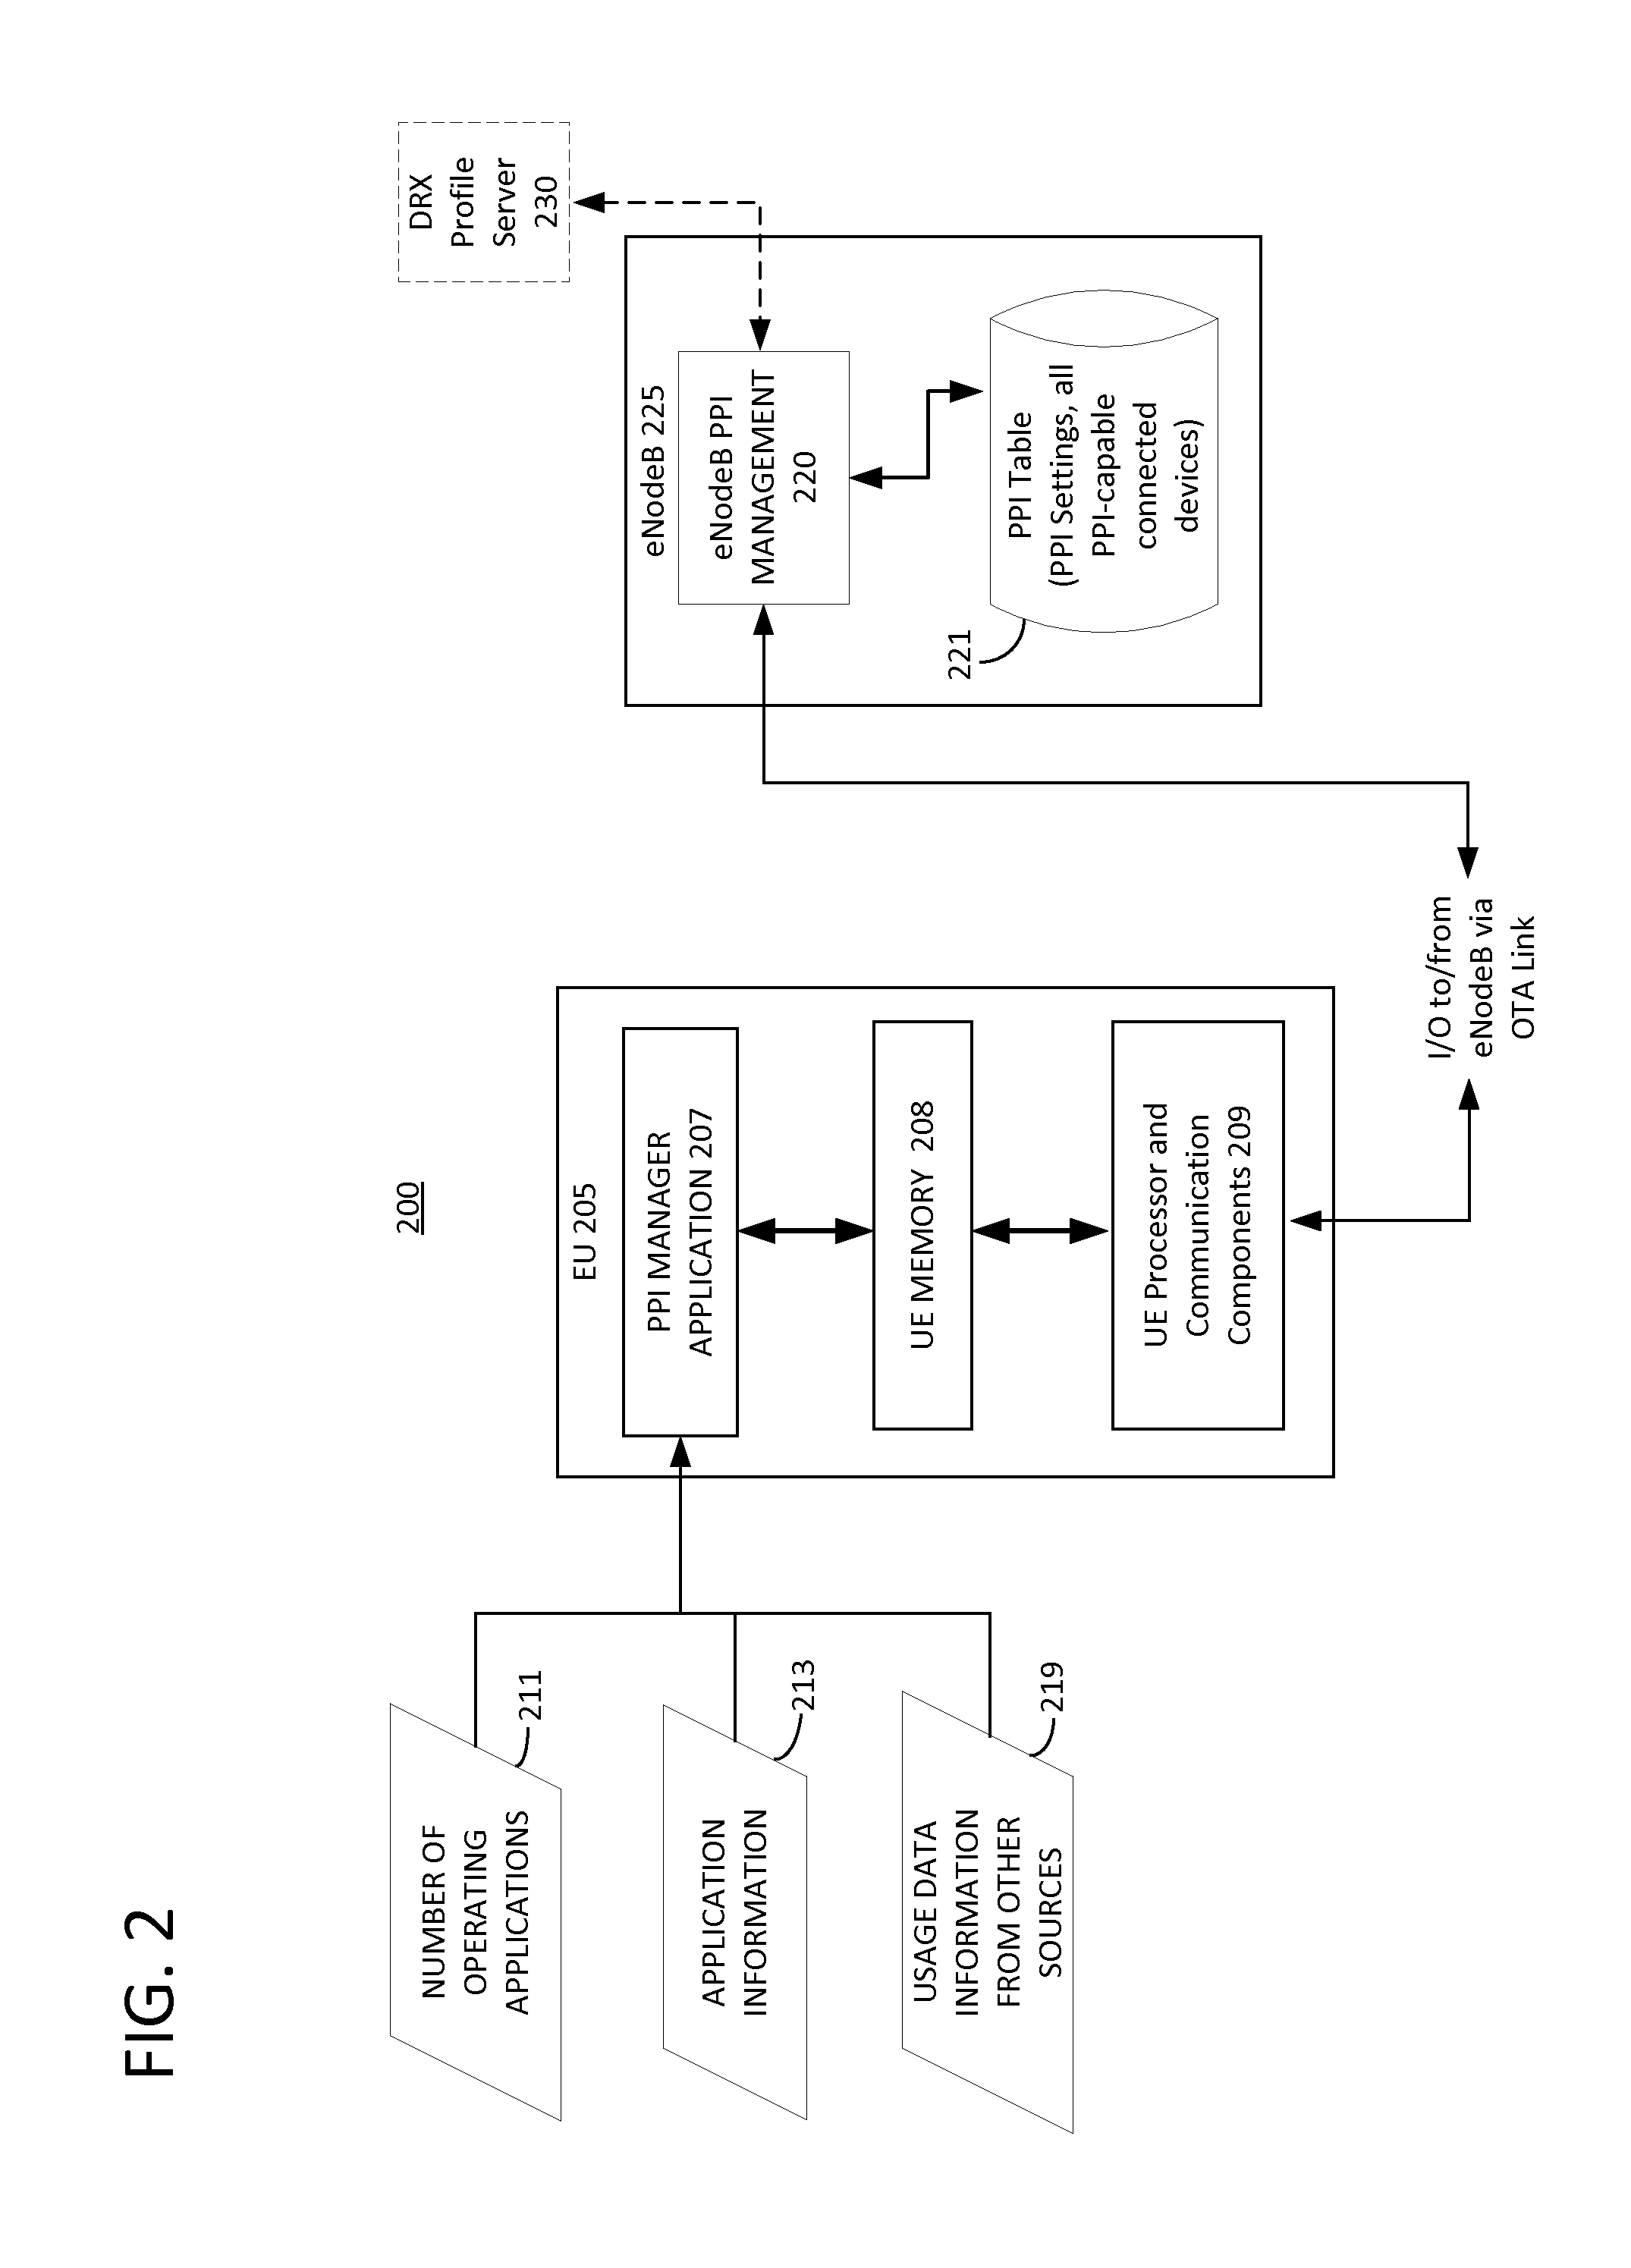 Device Assisted Multi-Step Adaptive Discontinuous Reception (DRX) Operations Using Power Preference Indicator